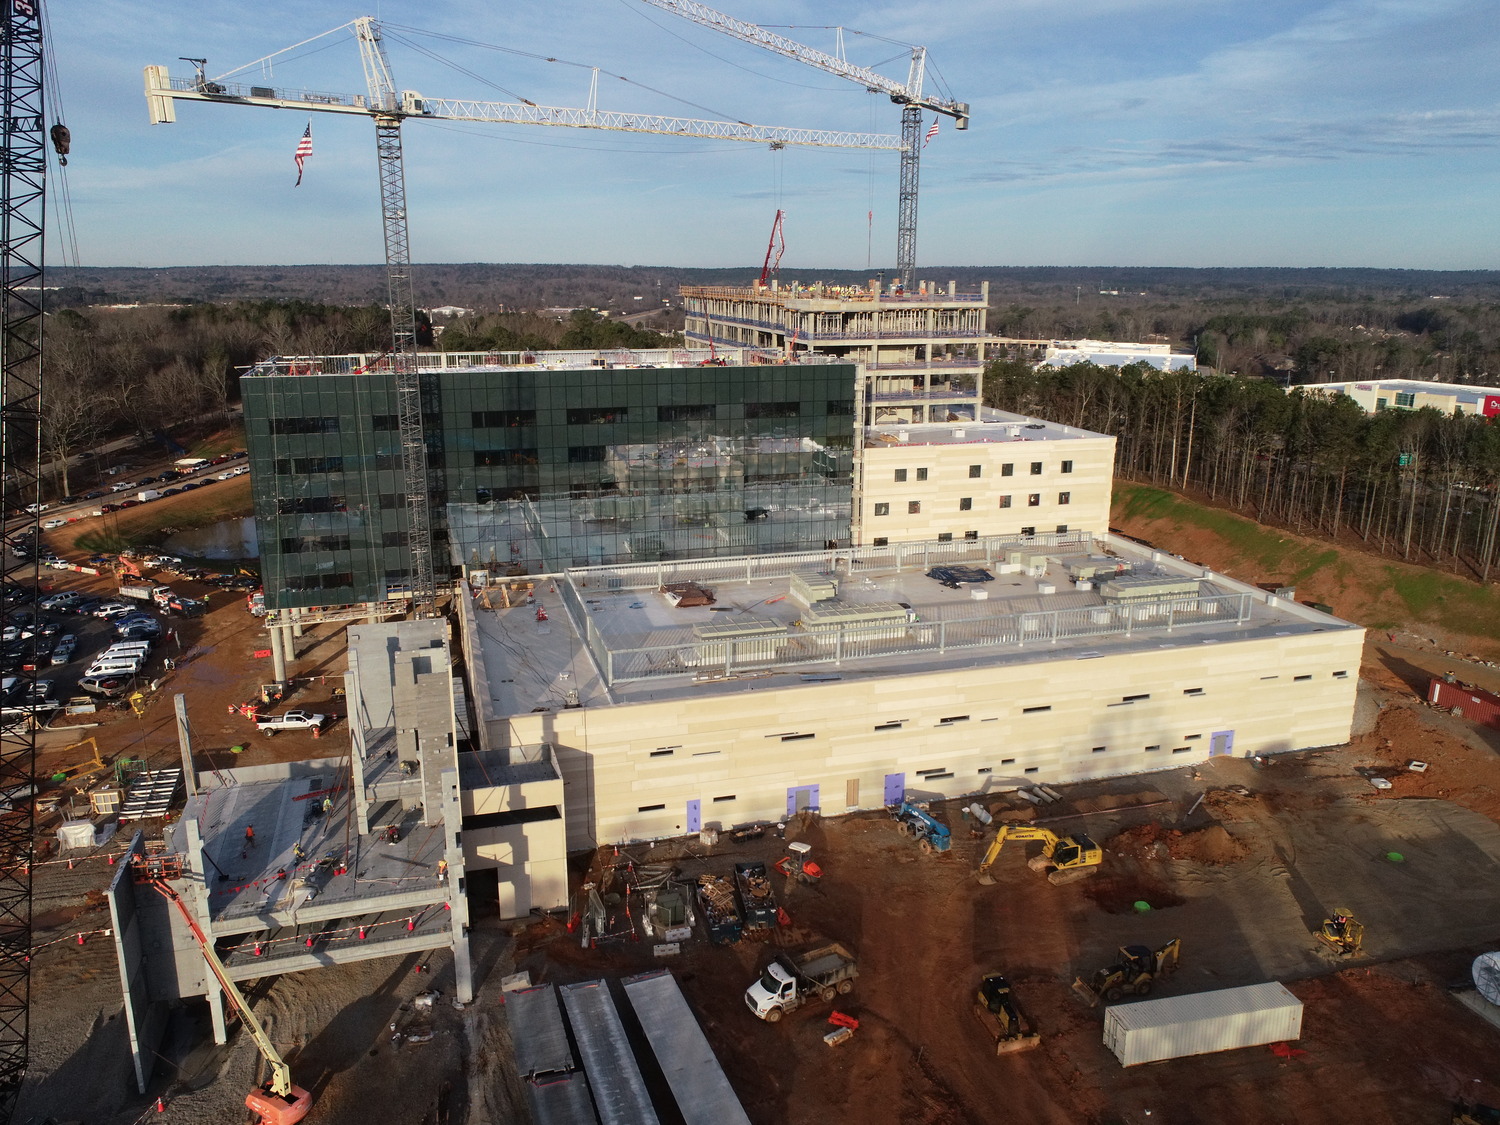 Photos from February 2023 of the The Next Medical West Replacement Hospital in McCalla, Alabama.

MedWest
UAB
Healthcare
Crane